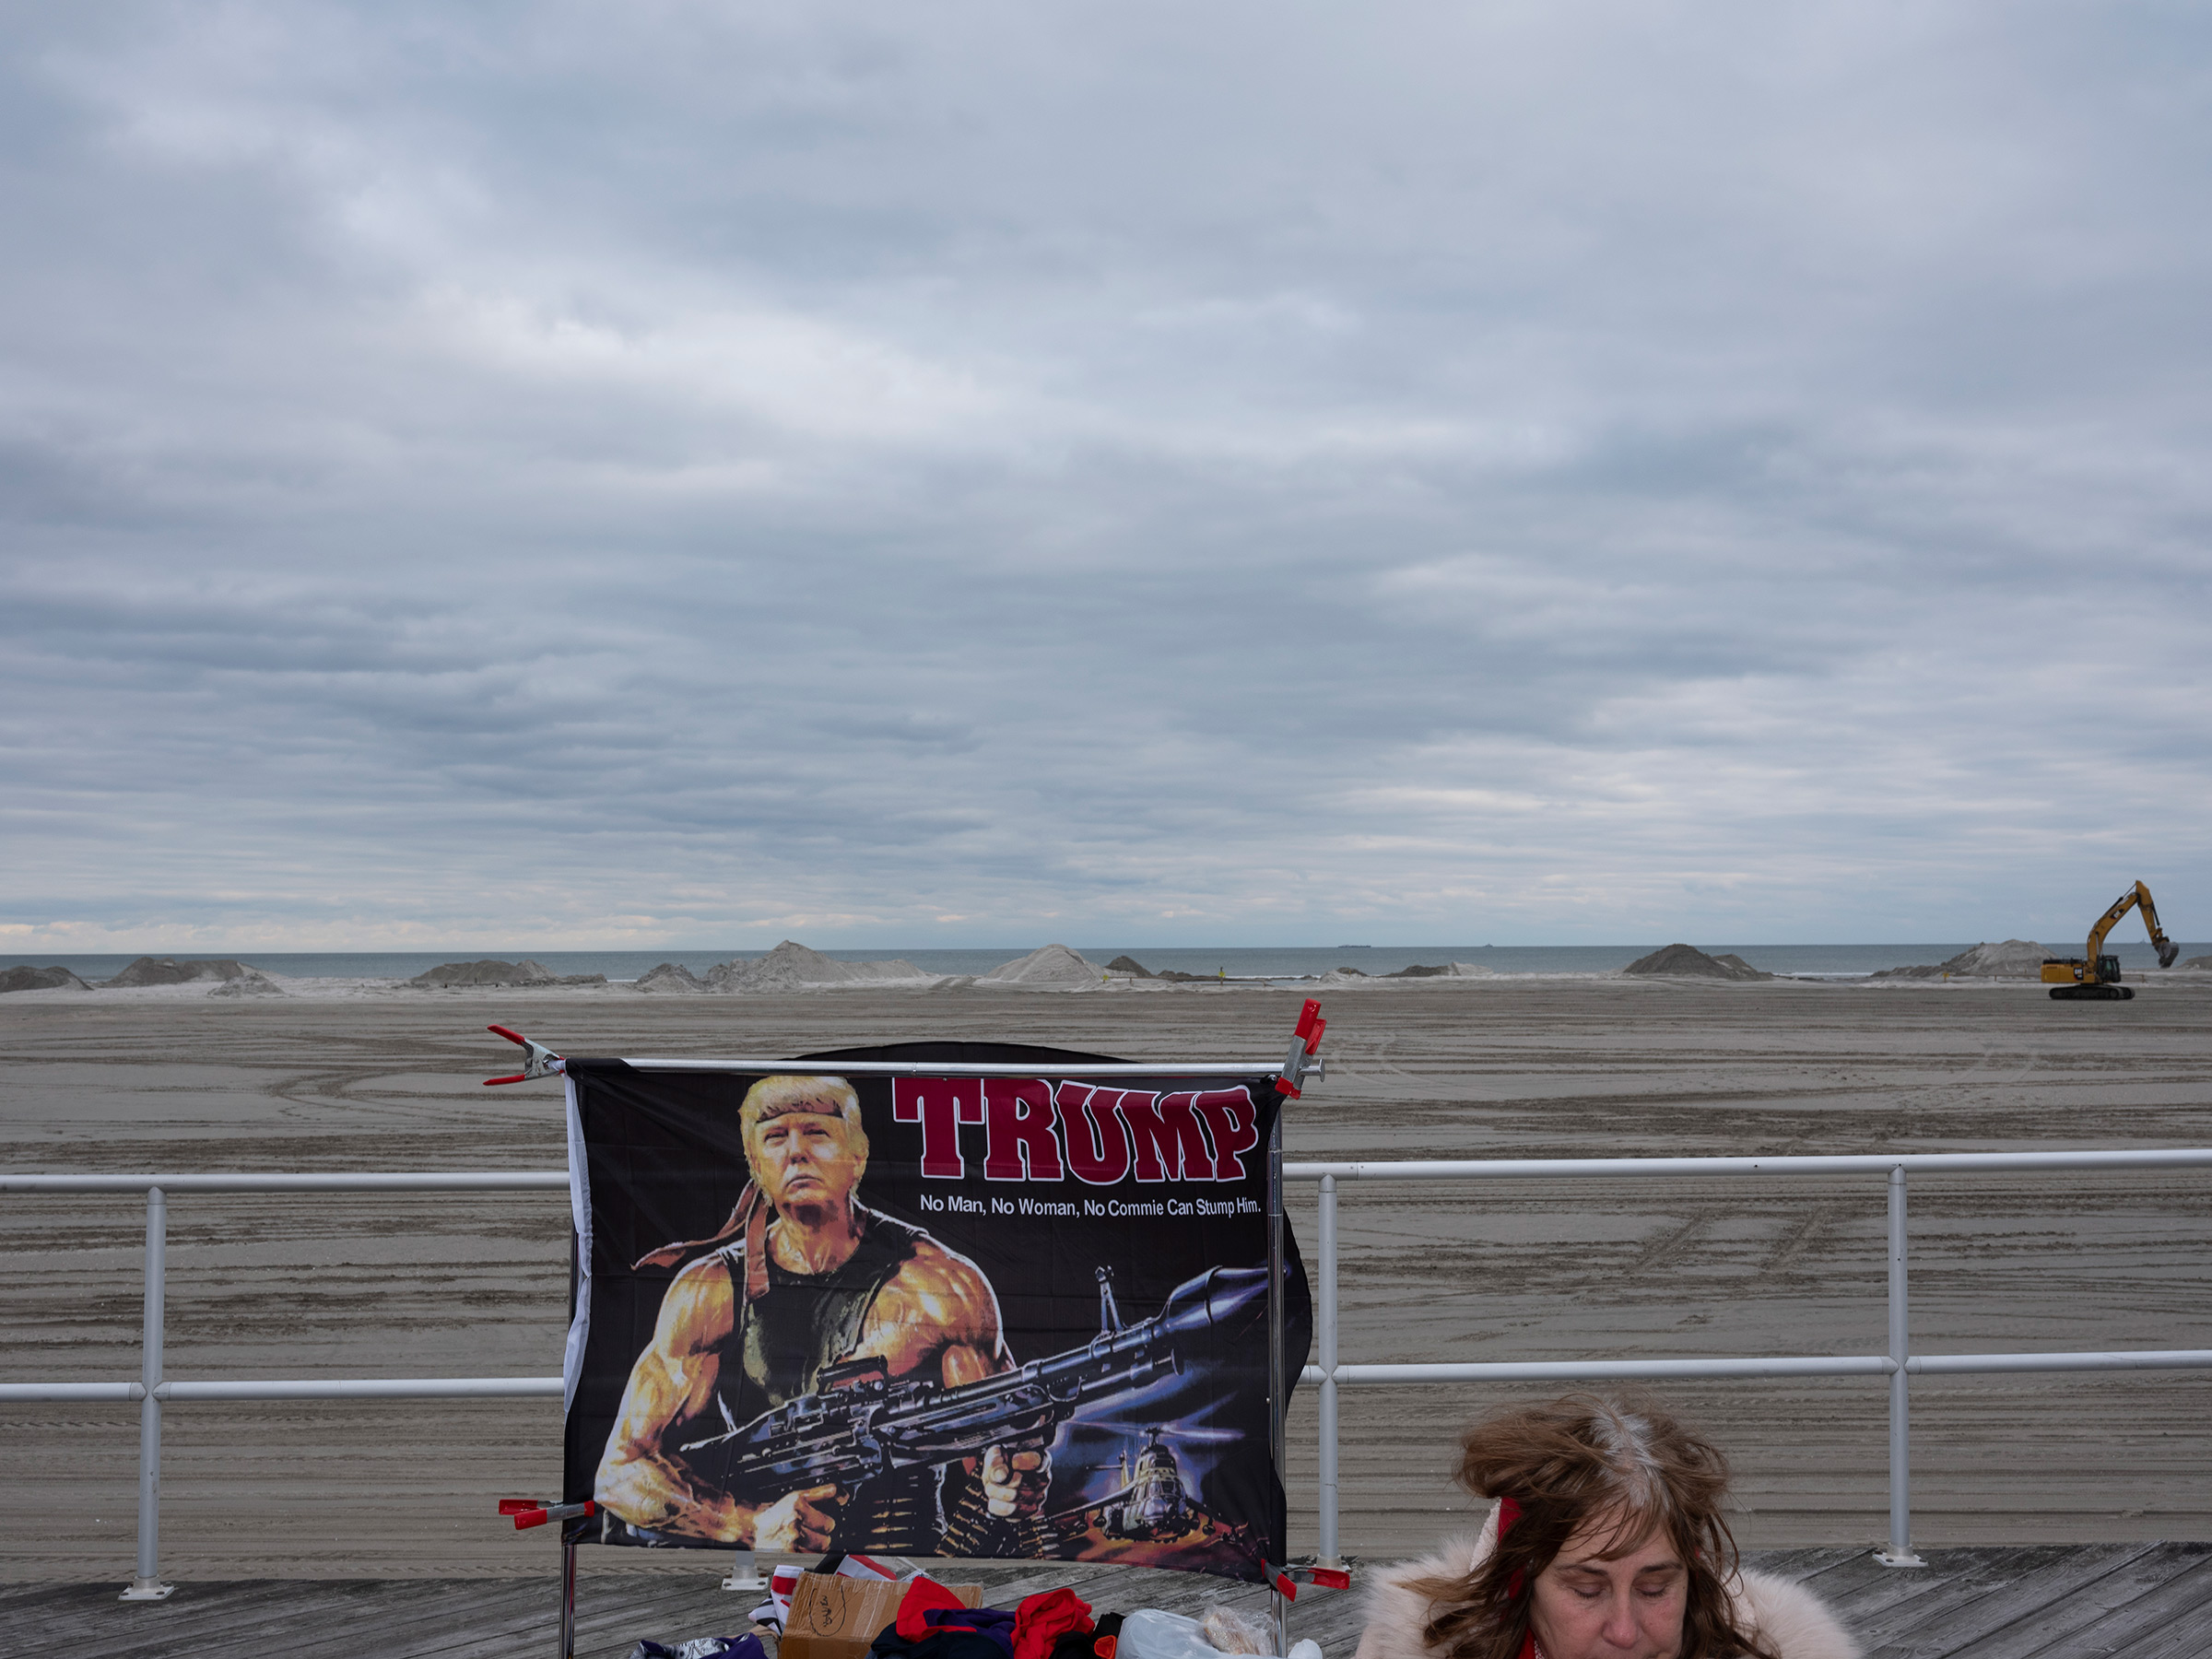 2020. Wildwood, New Jersey. USA. A vendor sells Donald Trump merchandise.  President Trump gave a rally in Wildwood, New Jersey to a capacity crowd of 7,400, with many more thousands unable to get in who watched on jumbotrons outside.